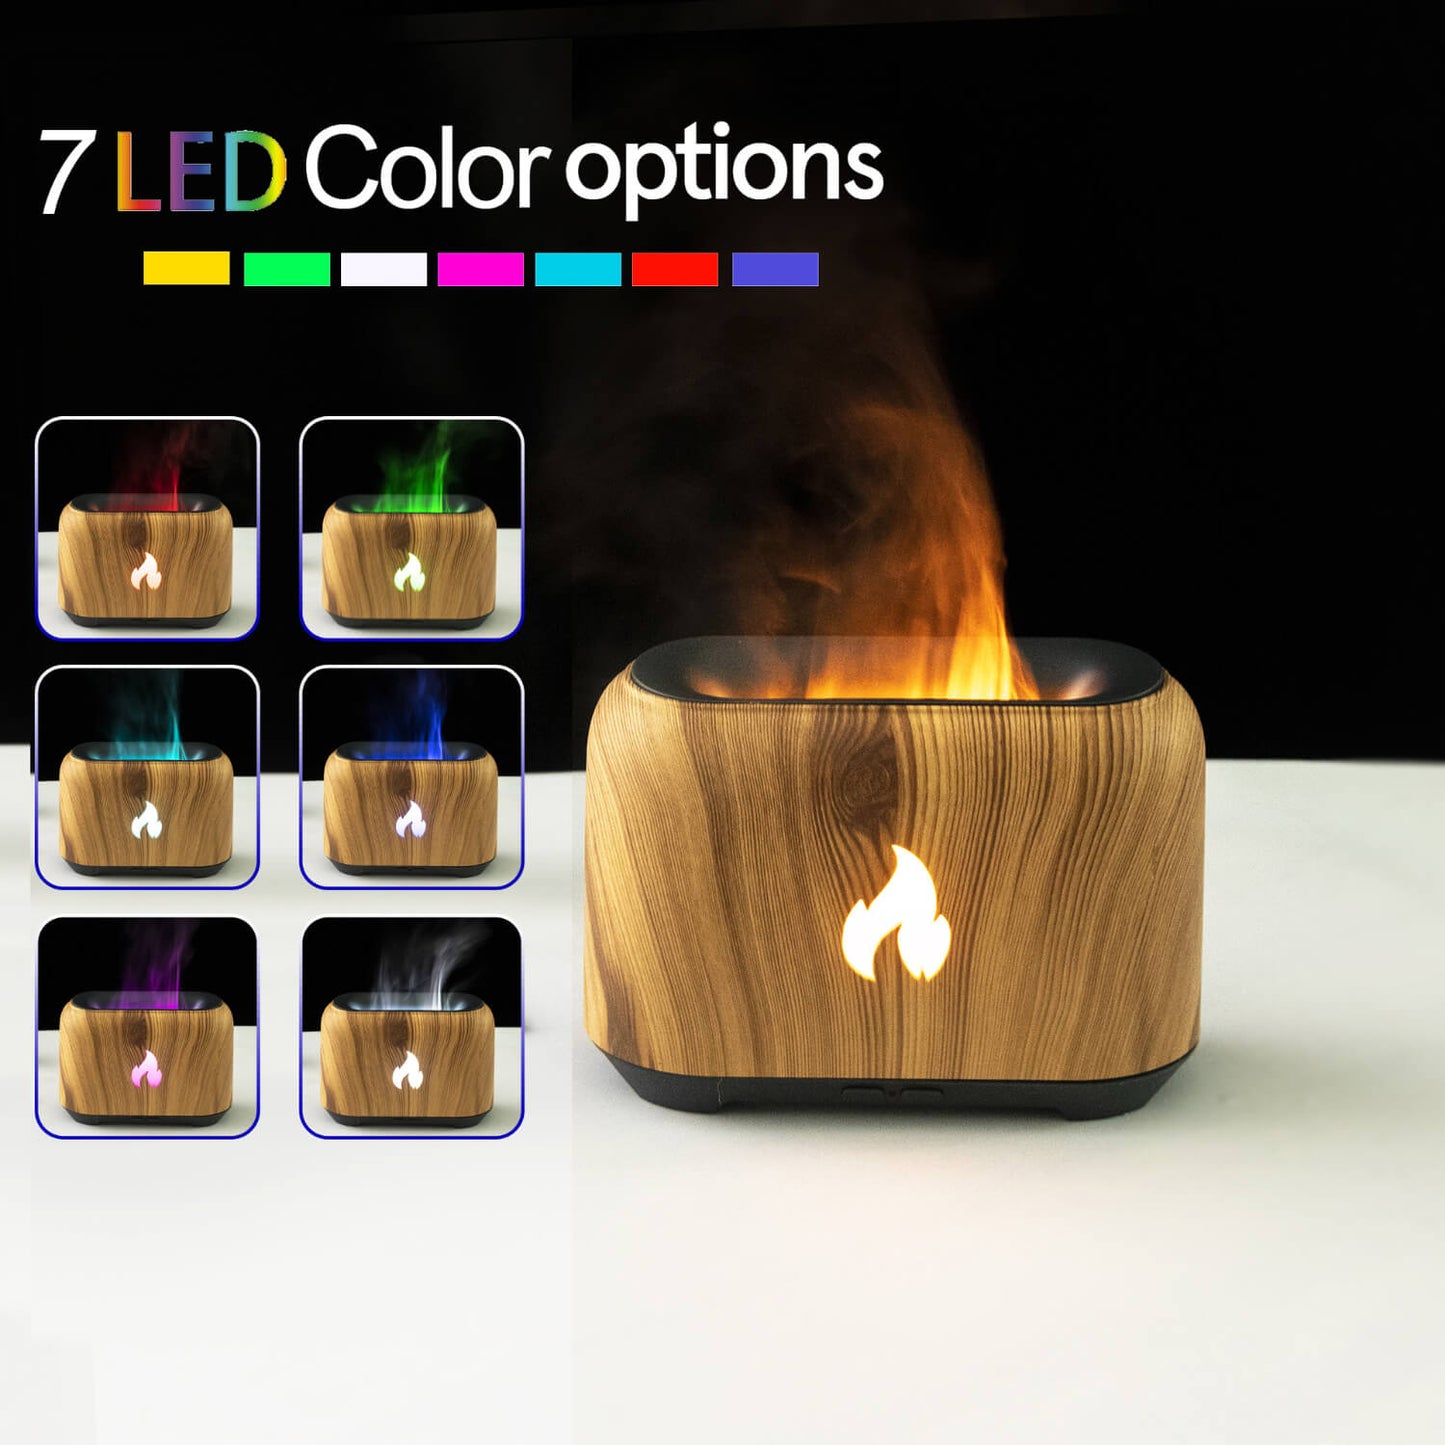 Add a touch of natural charm with our Colorful Flame Aroma Humidifier in light wood.